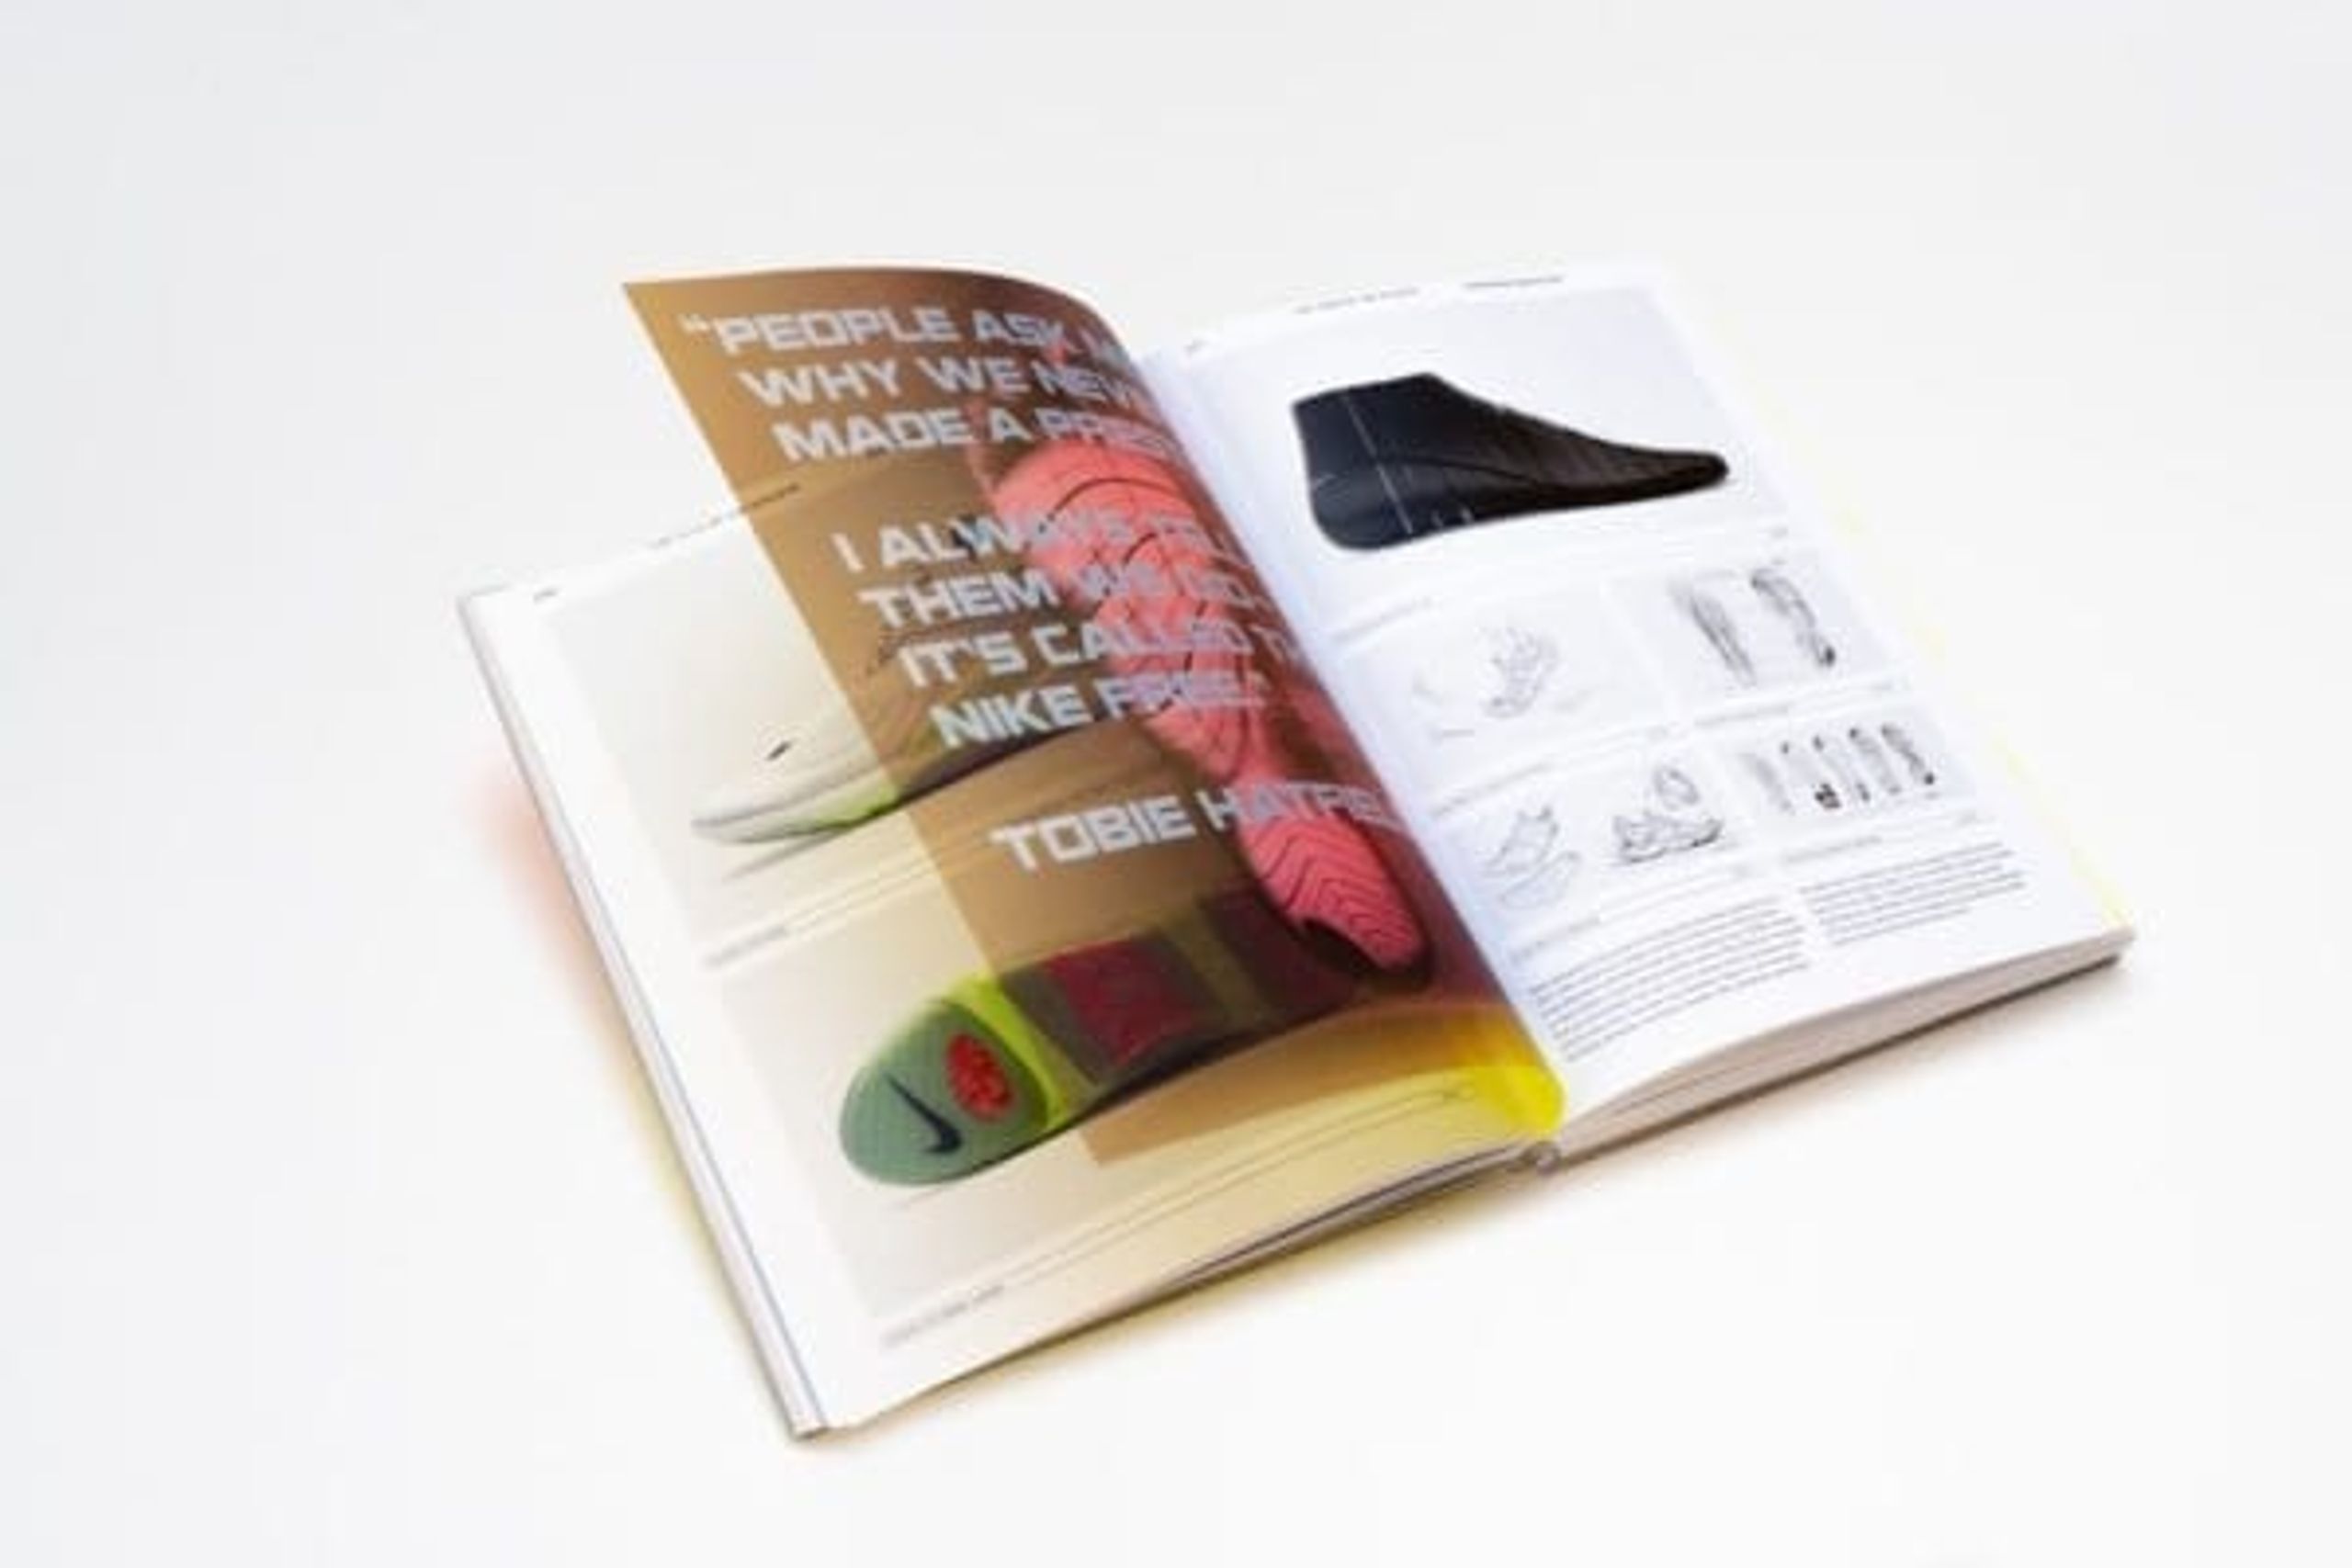 Livre de New Mags Nike: Better Is Temporary